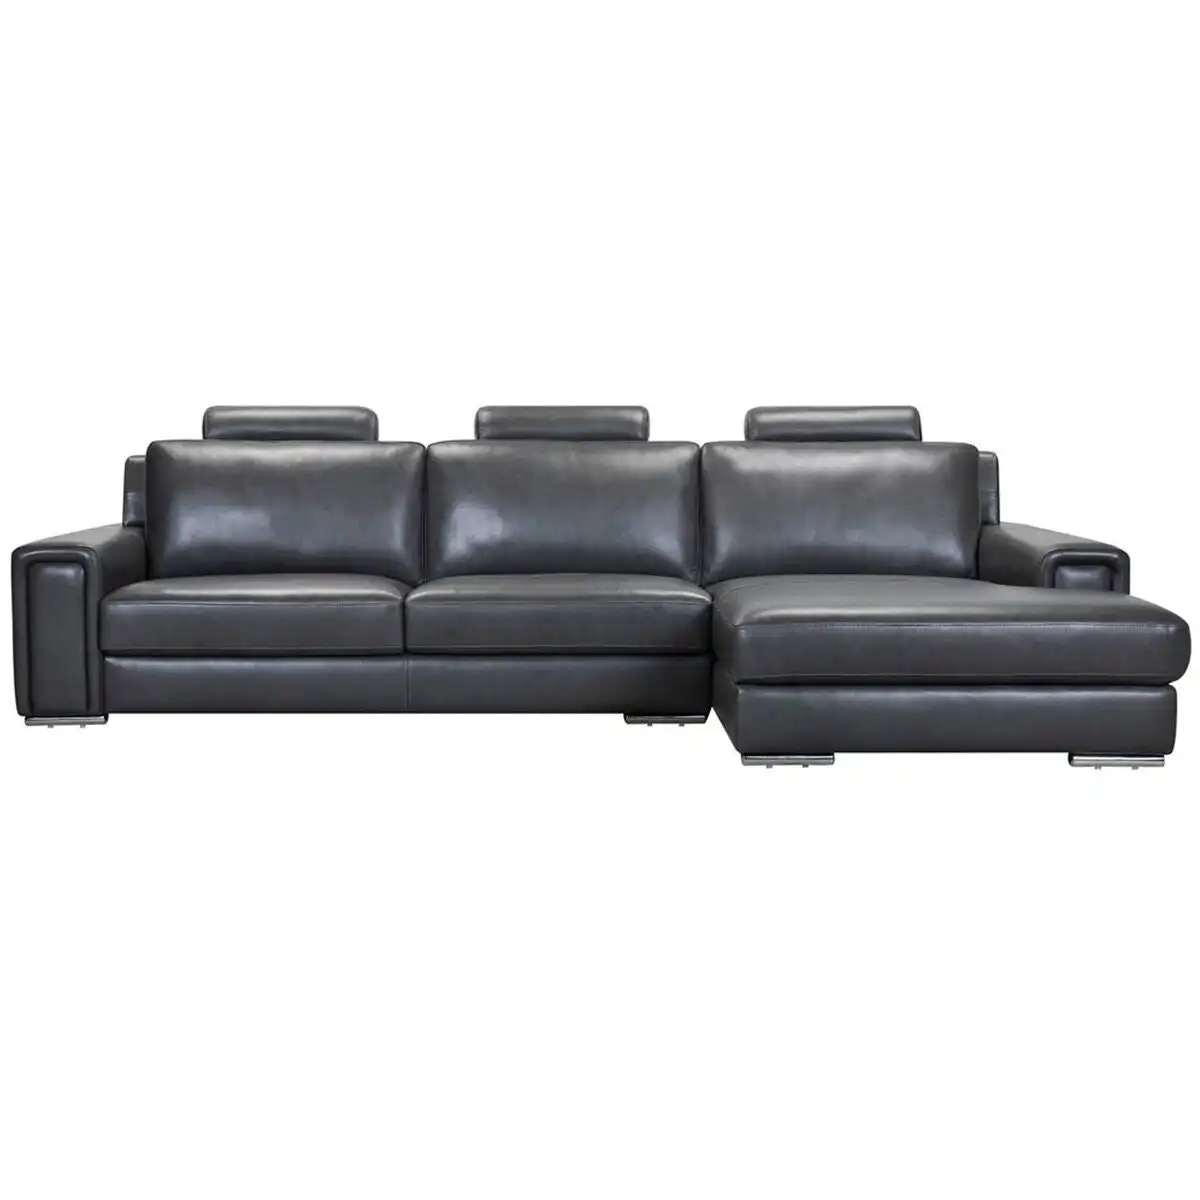 Kalona Ahlbeck Anthracite Three Seater Left Facing Chaise Sofa